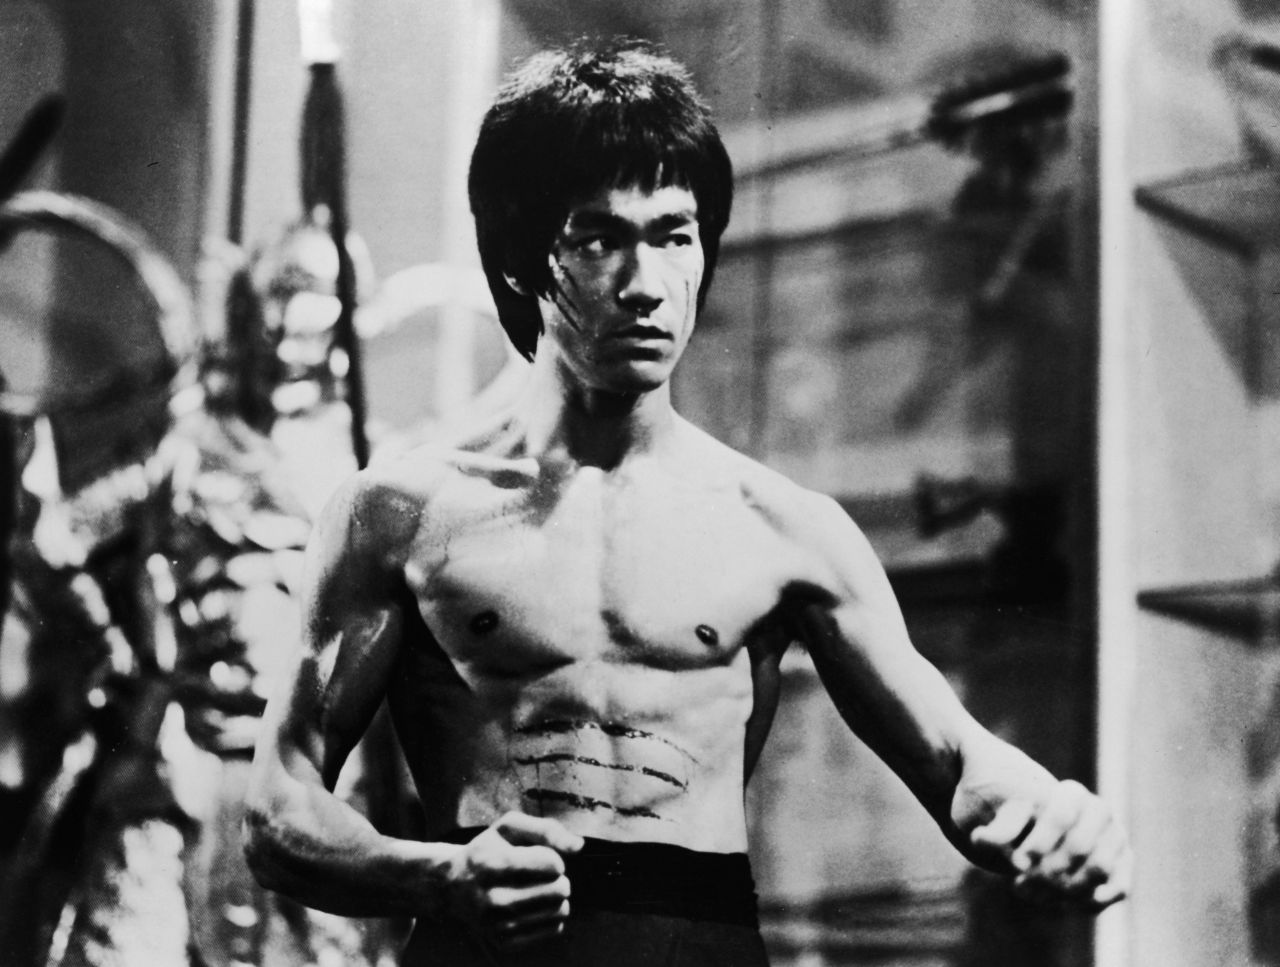 Actor and martial arts expert Bruce Lee, who was working on dubbing the film "Enter the Dragon" when he died in 1973 of a brain edema, caused by a prescription painkiller. 